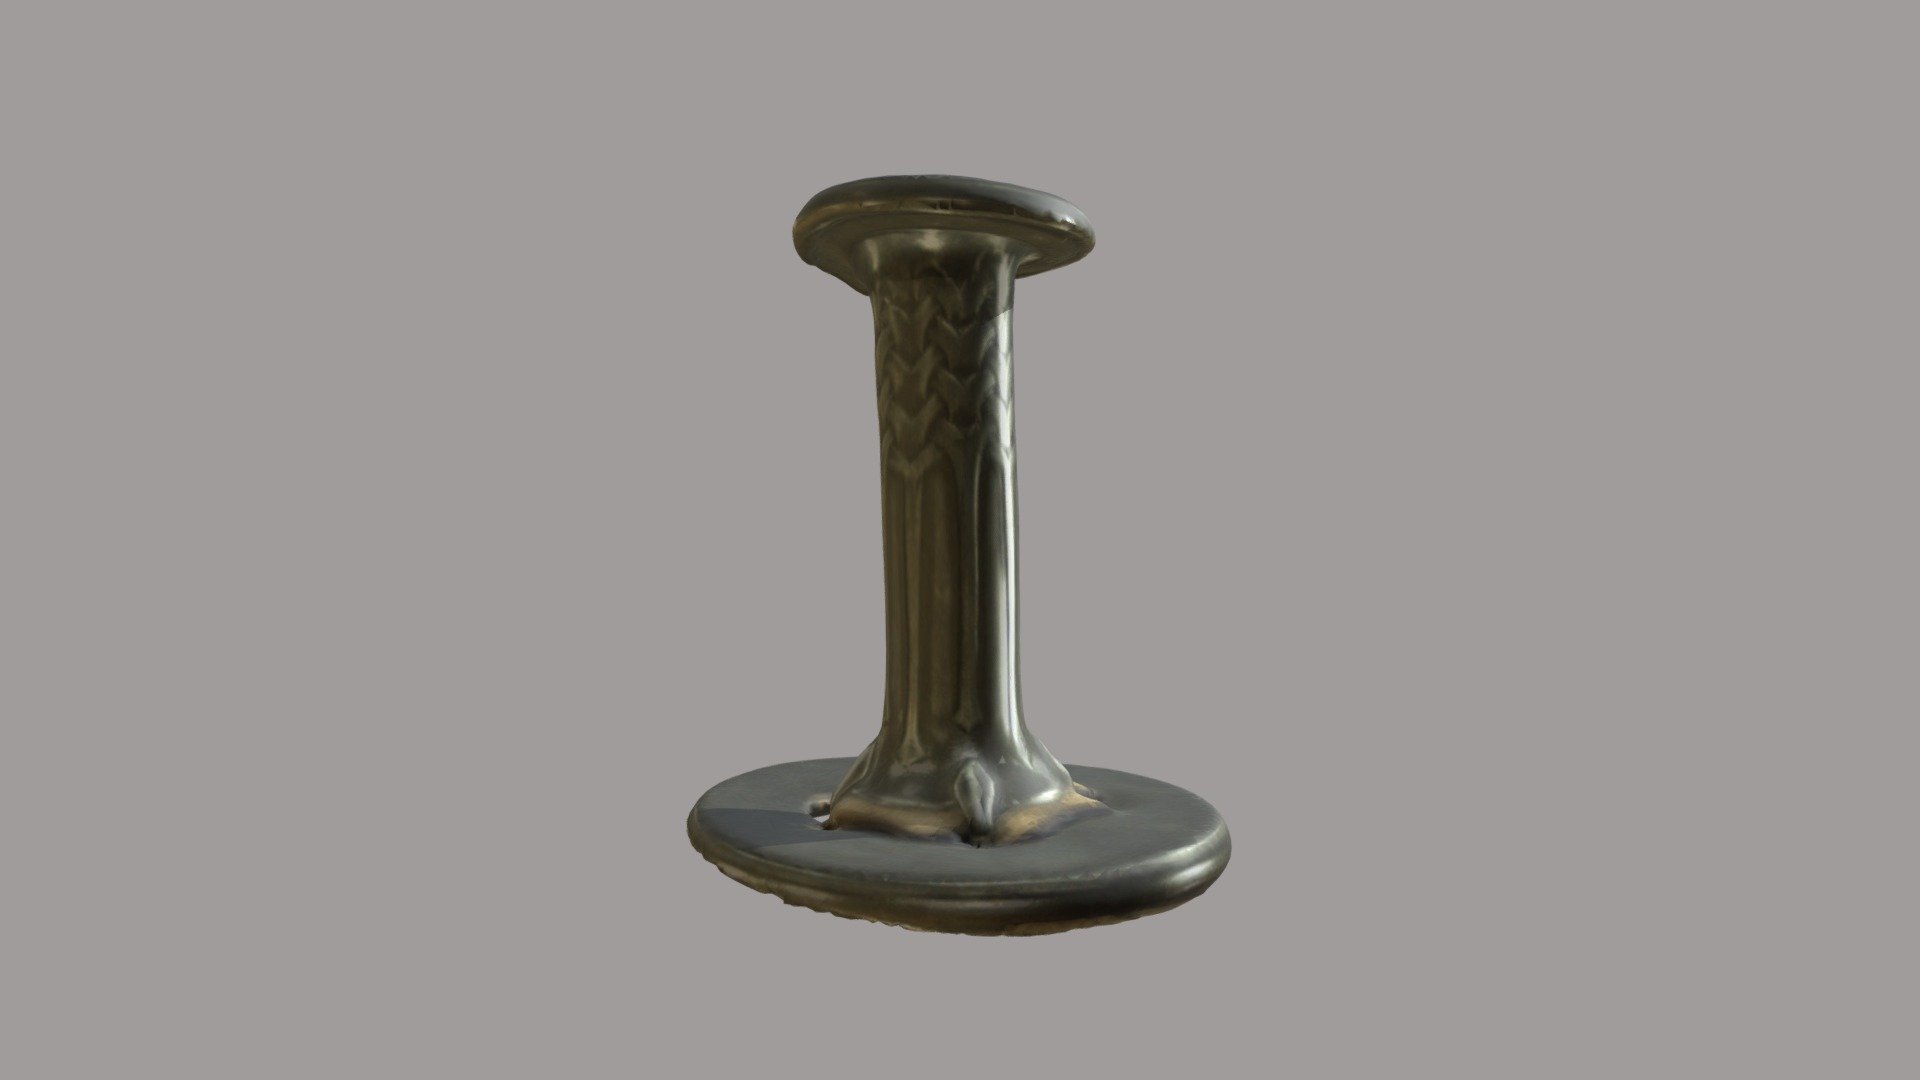 Candlestick designed by Archibald Knox